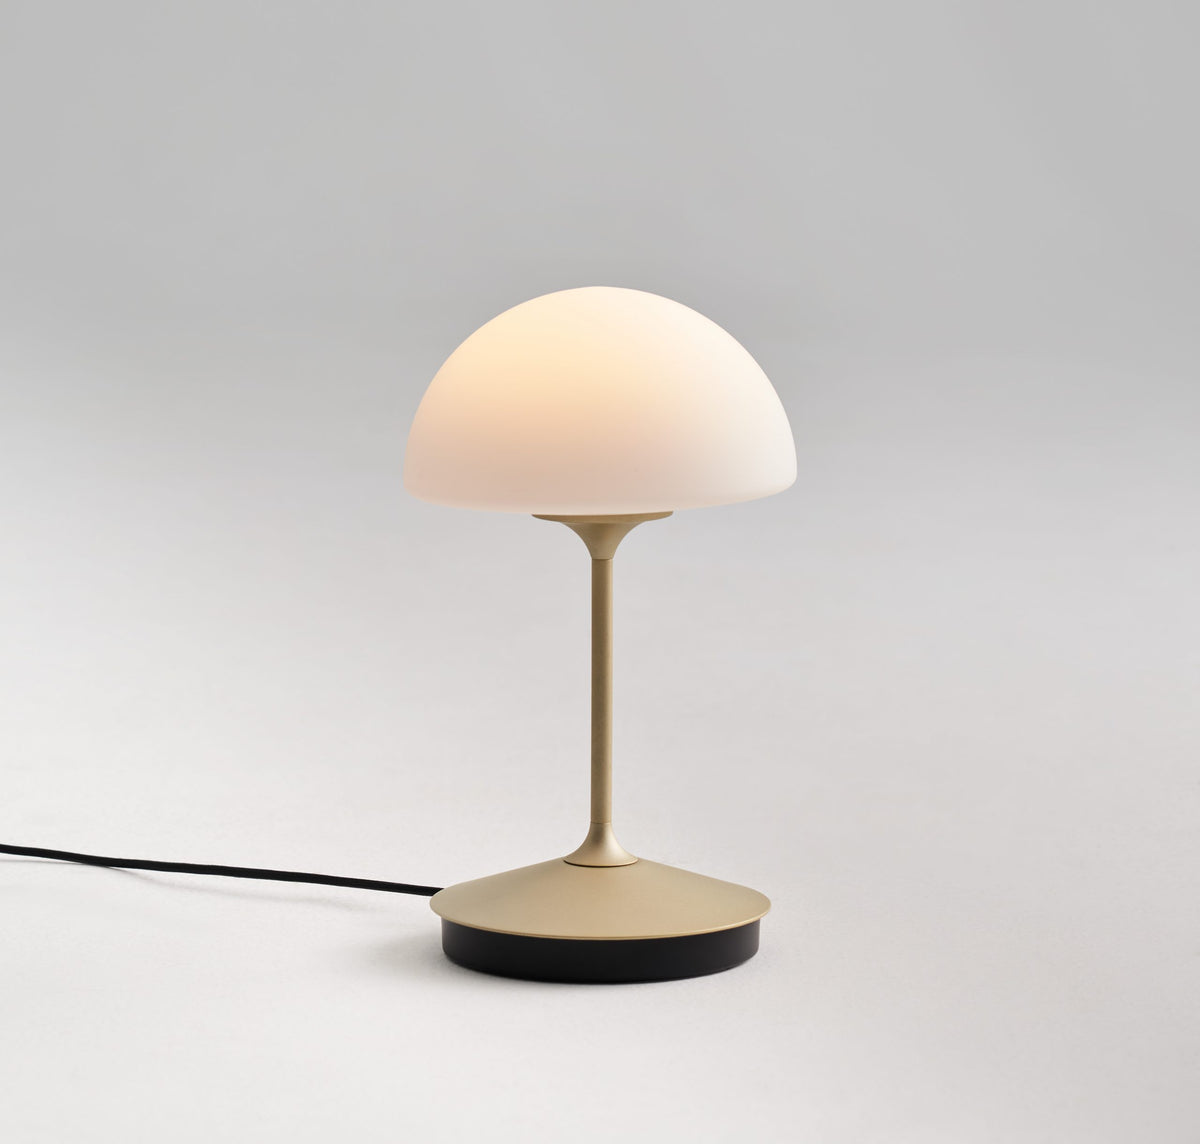 Pensee Table Lamp by Seed Design